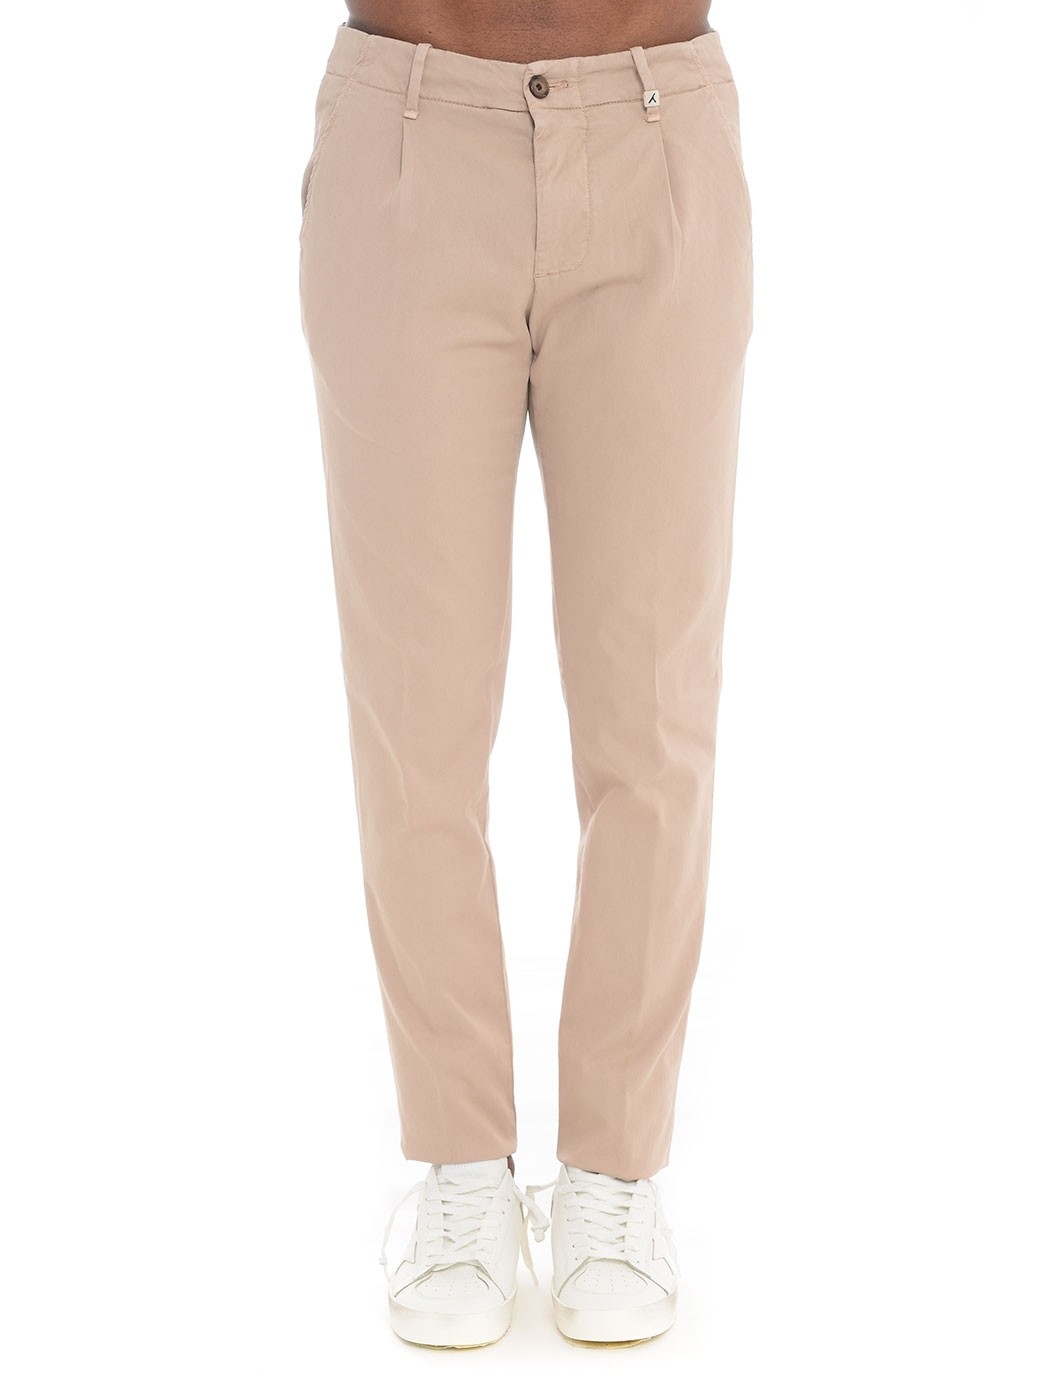  MAN TROUSERS,SPRING SUMMER TROUSERS,COTTON TROUSERS,SKIN FIT TROUSERS,INCOTEX TROUSERS,JACOB COHEN TROUSERS,NEIL BARRETT TROUSERS,MSGM TROUSERS  MYTHS 22M09L-76